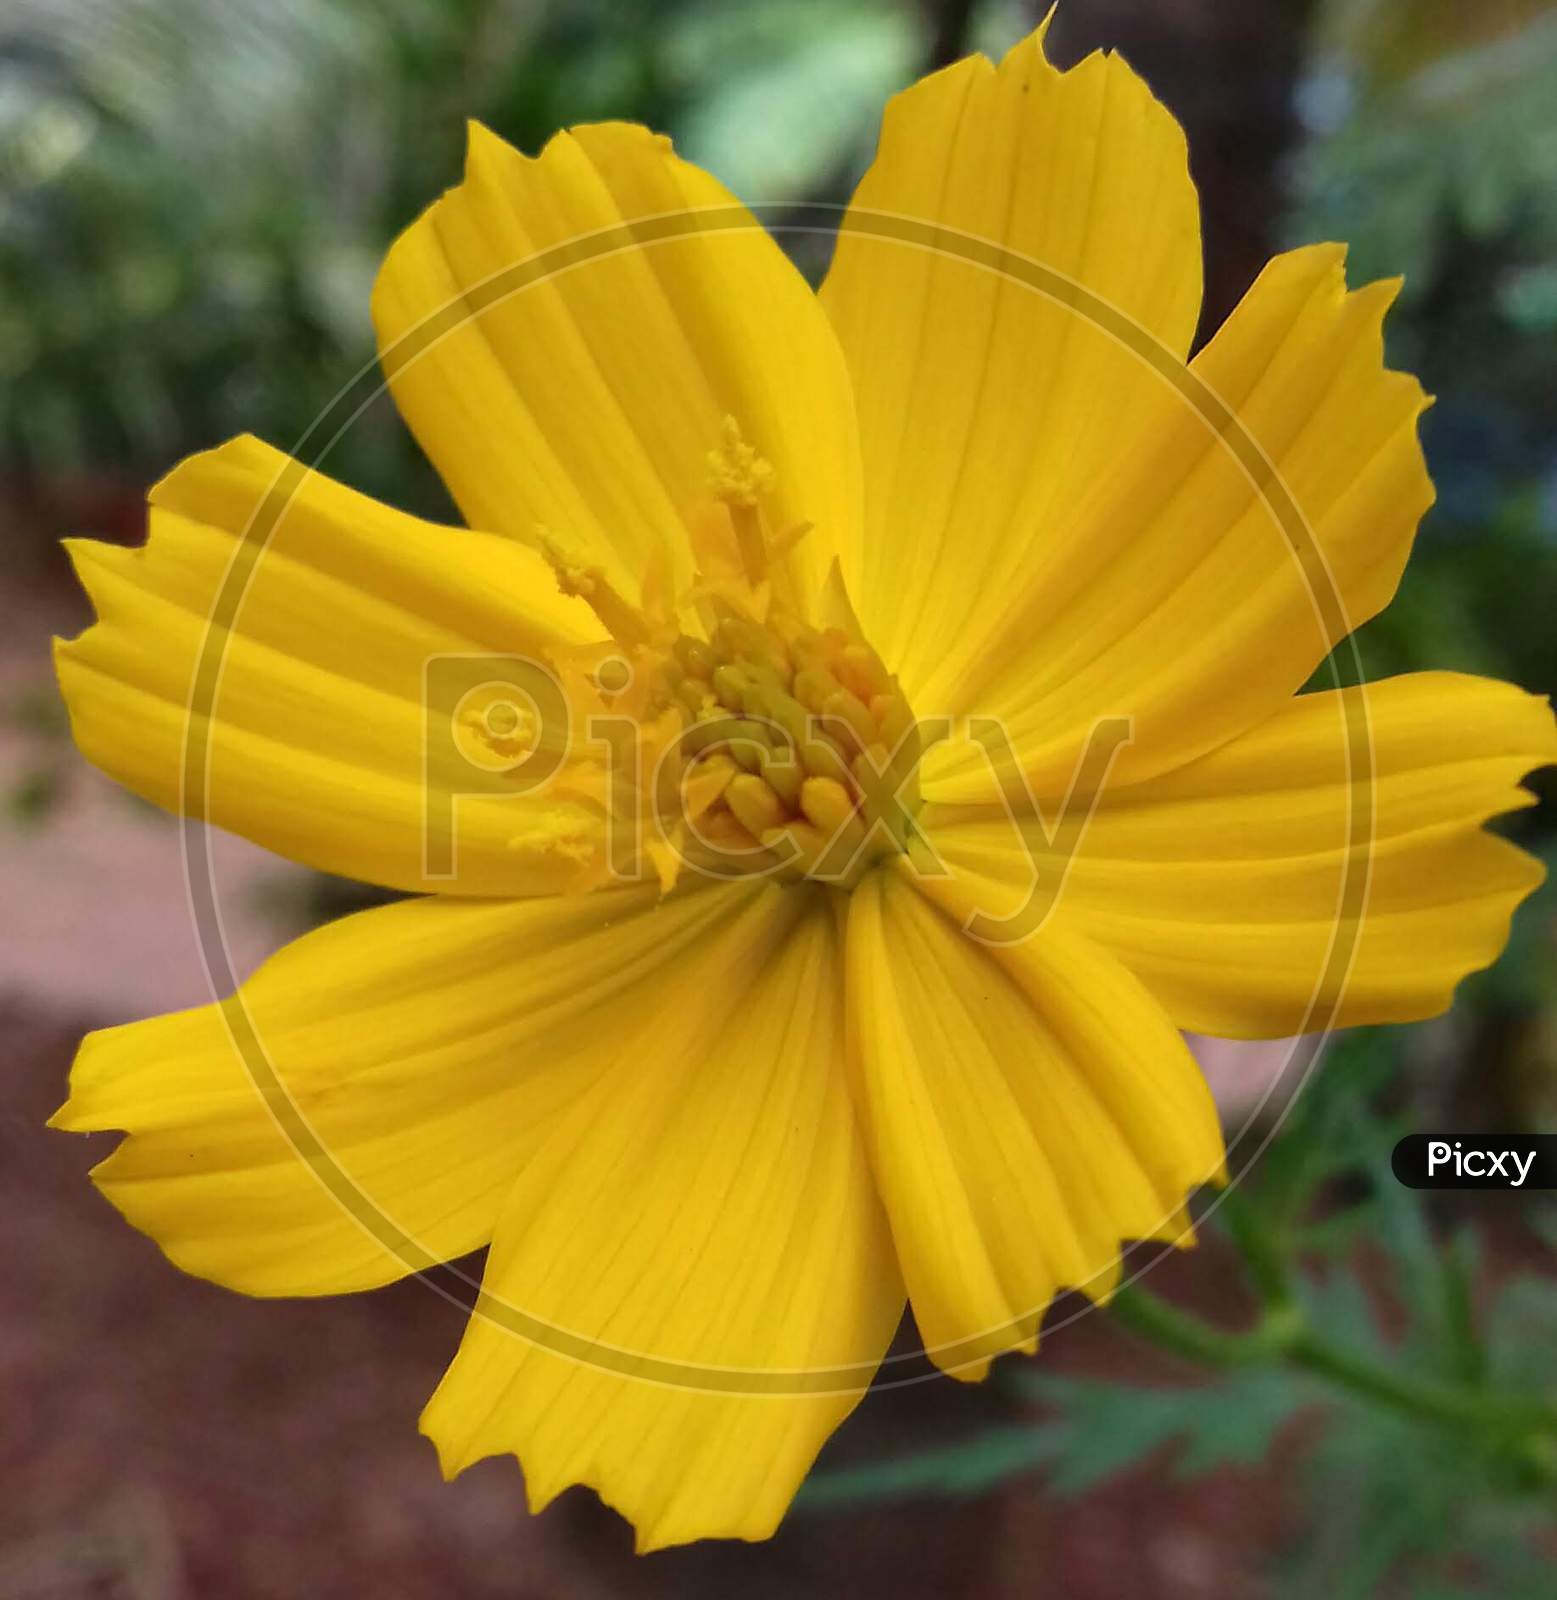 yellow coloured cosmos flower blossom